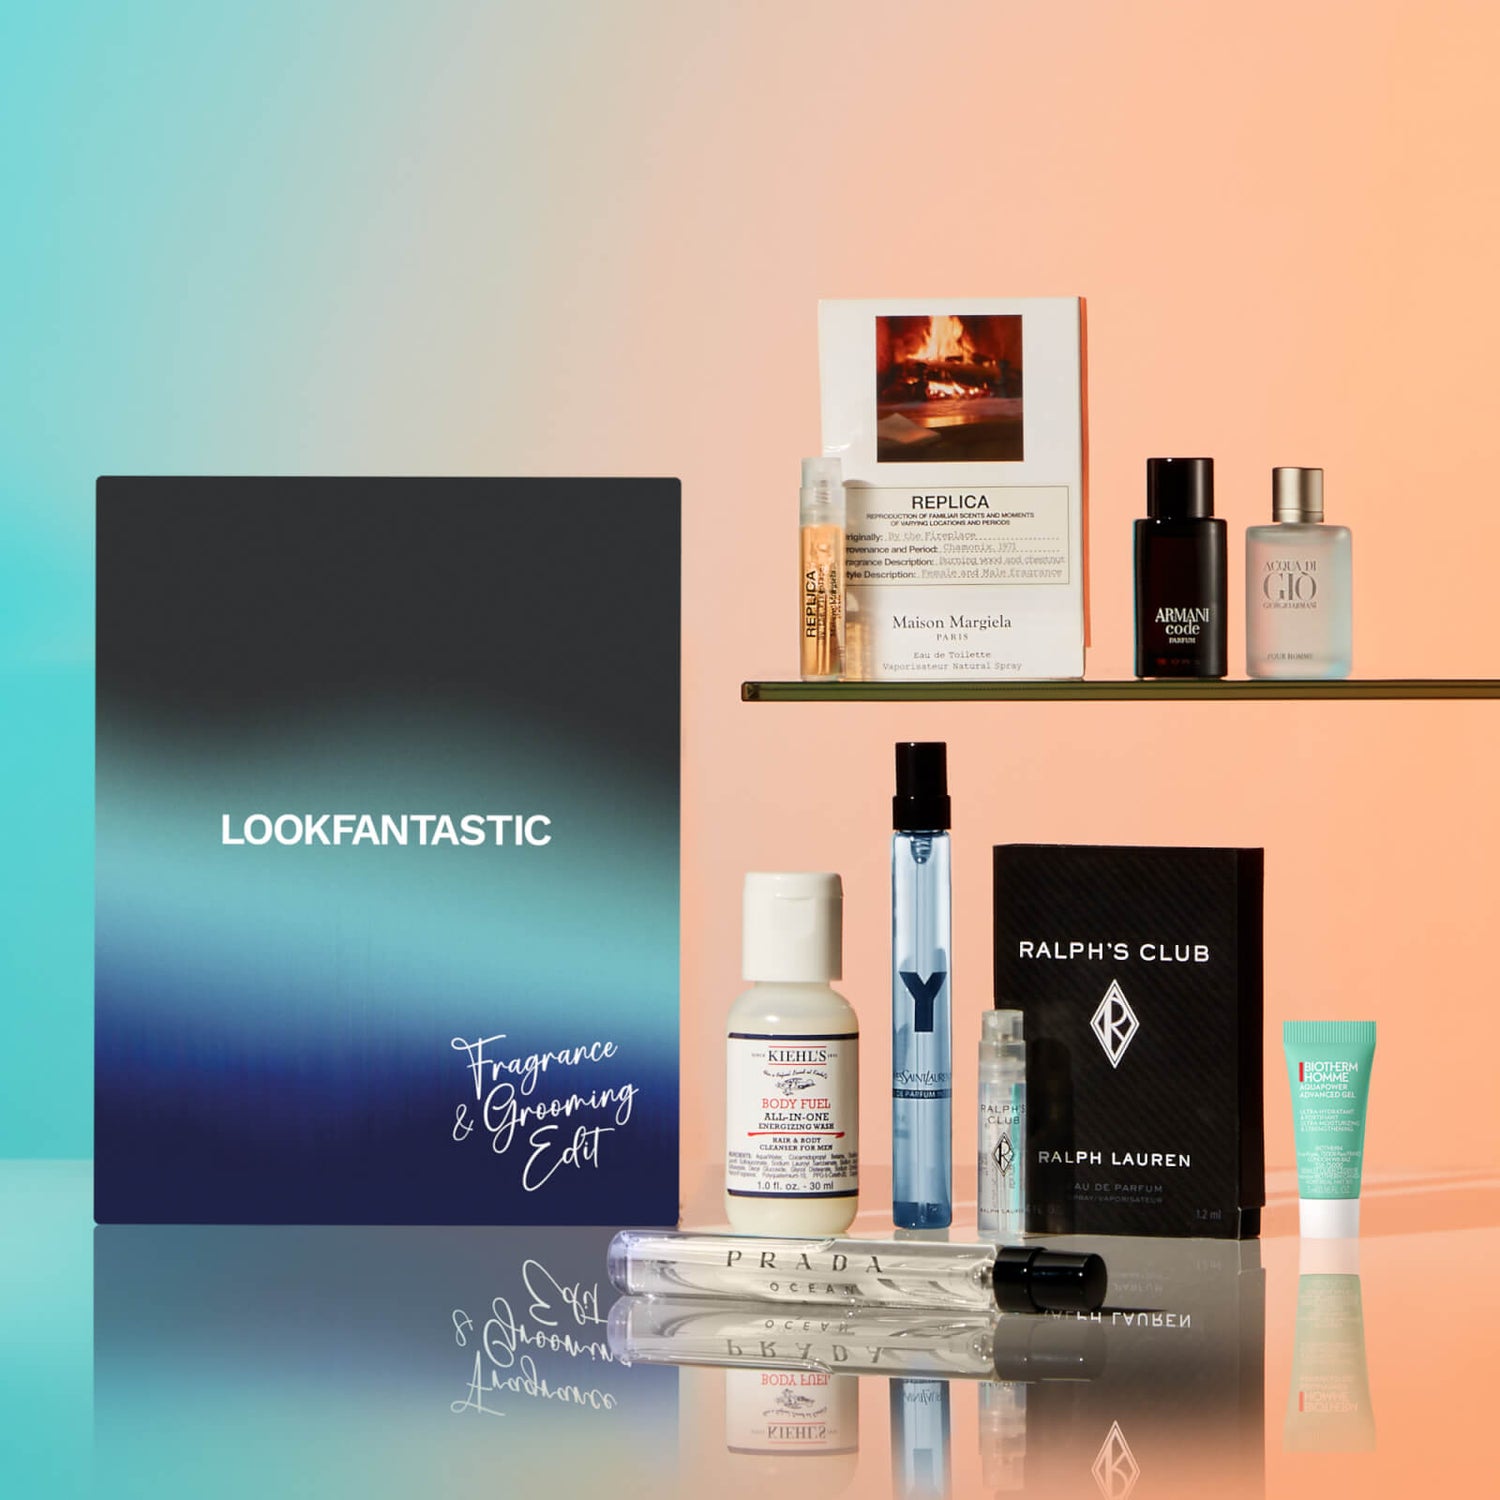 LOOKFANTASTIC Summer Fragrance & Grooming Edit (Includes a fully redeemable digital £55 voucher)